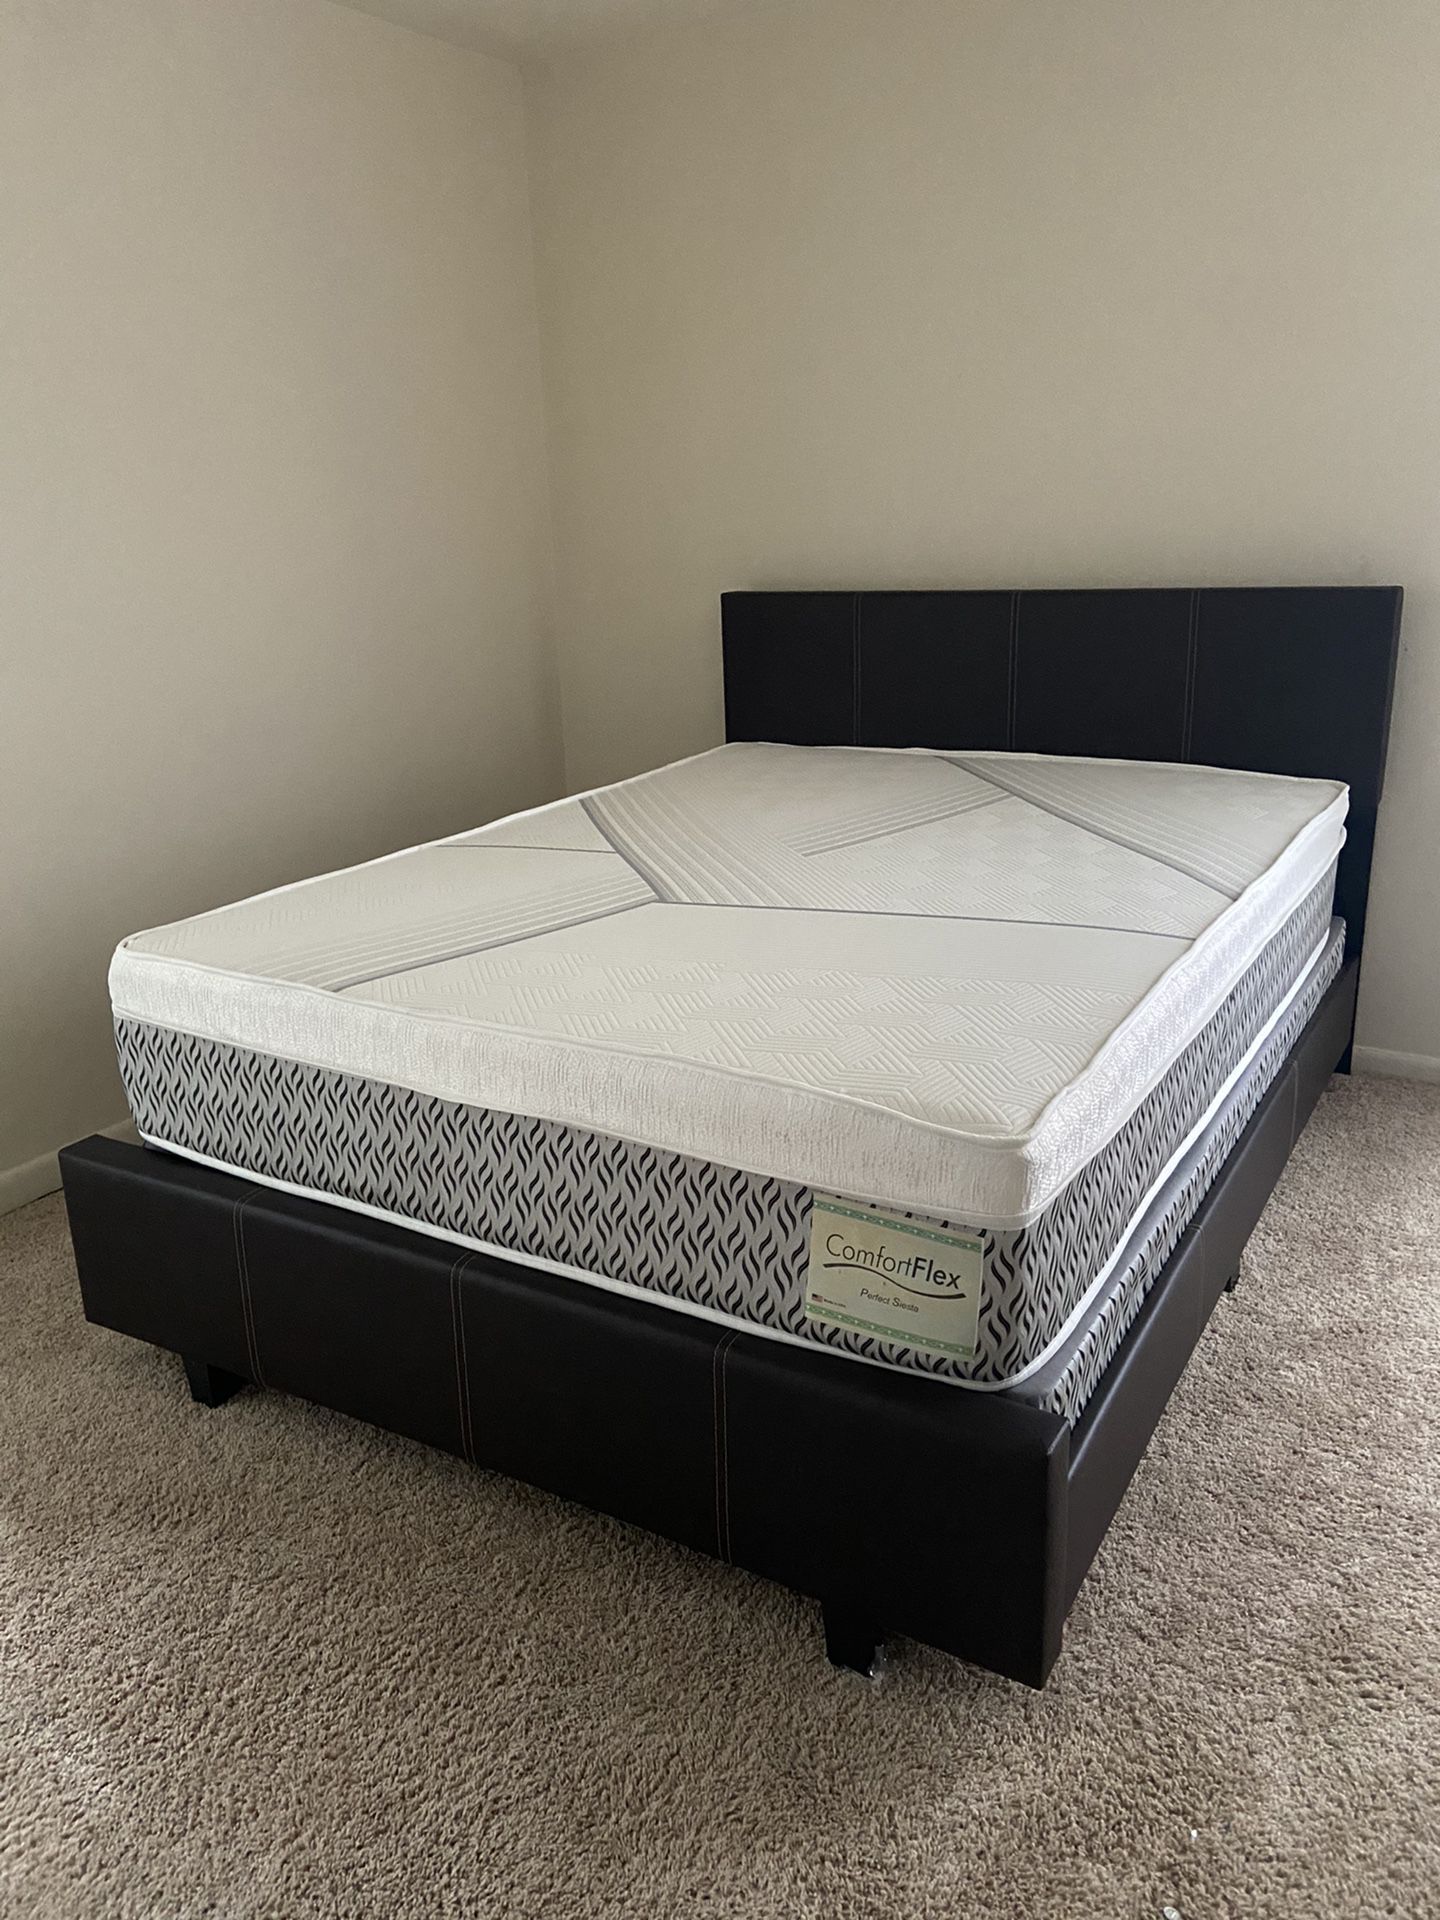 Queen Mattress Come With Bed 🛌 Frame And Free Box Spring - Free Delivery 🚚 Today 